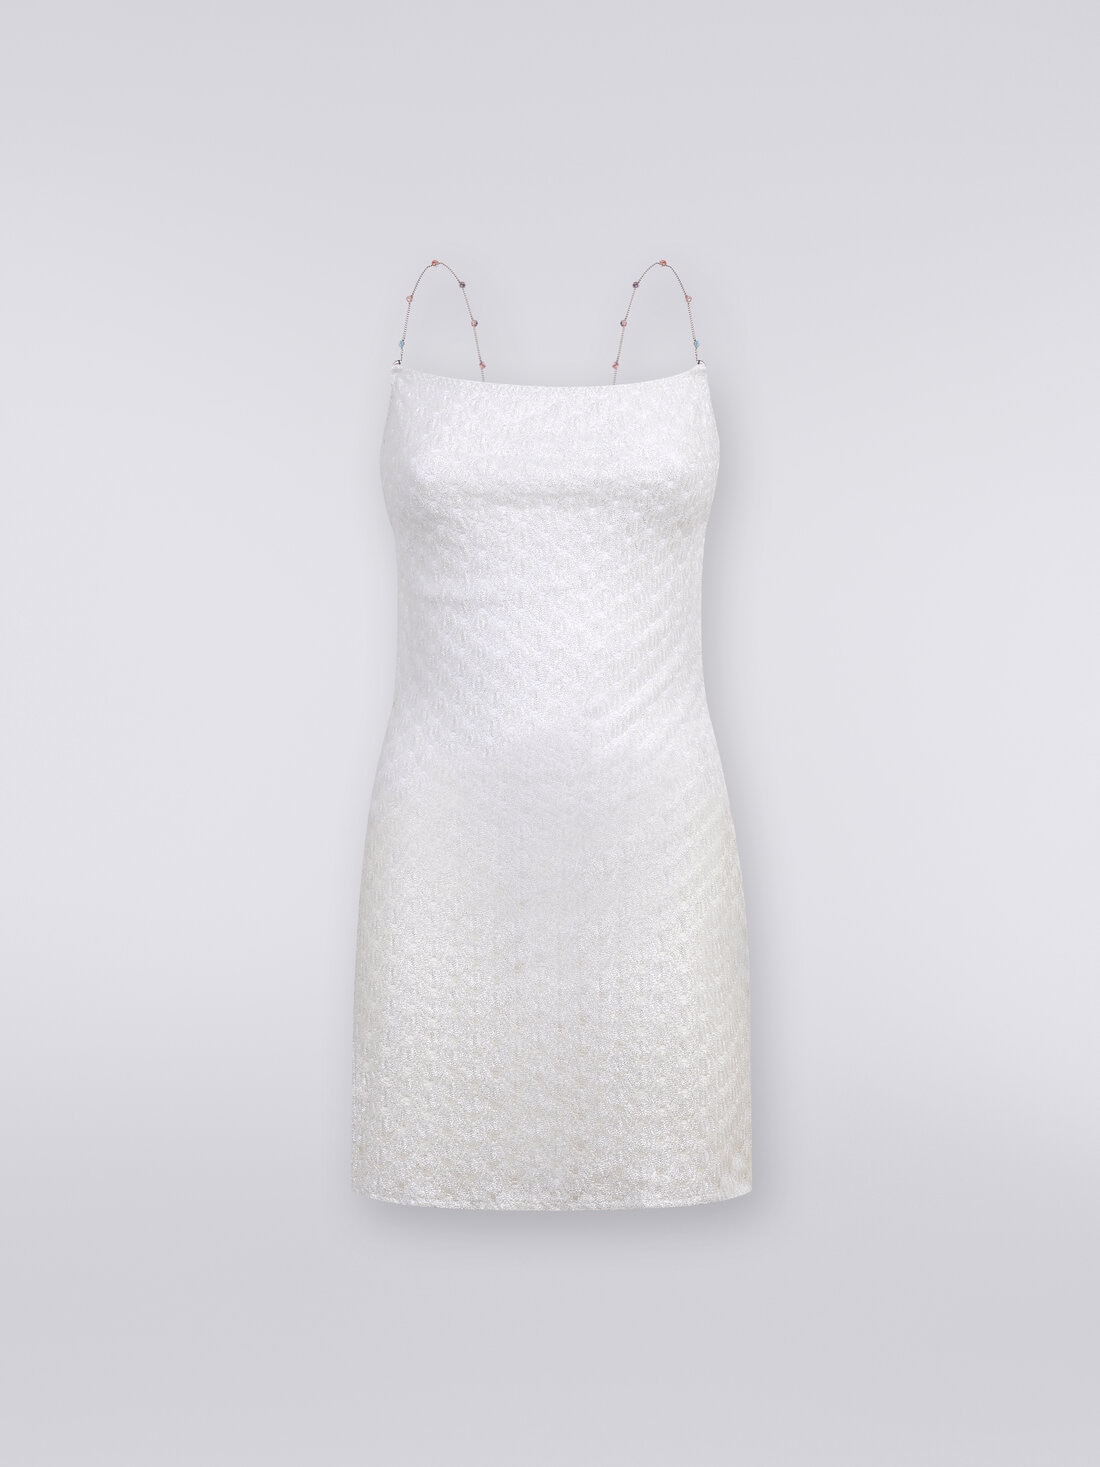 Lace-effect cover up dress with chain and gem straps, White  - MS24SQ00BR00TC14001 - 0